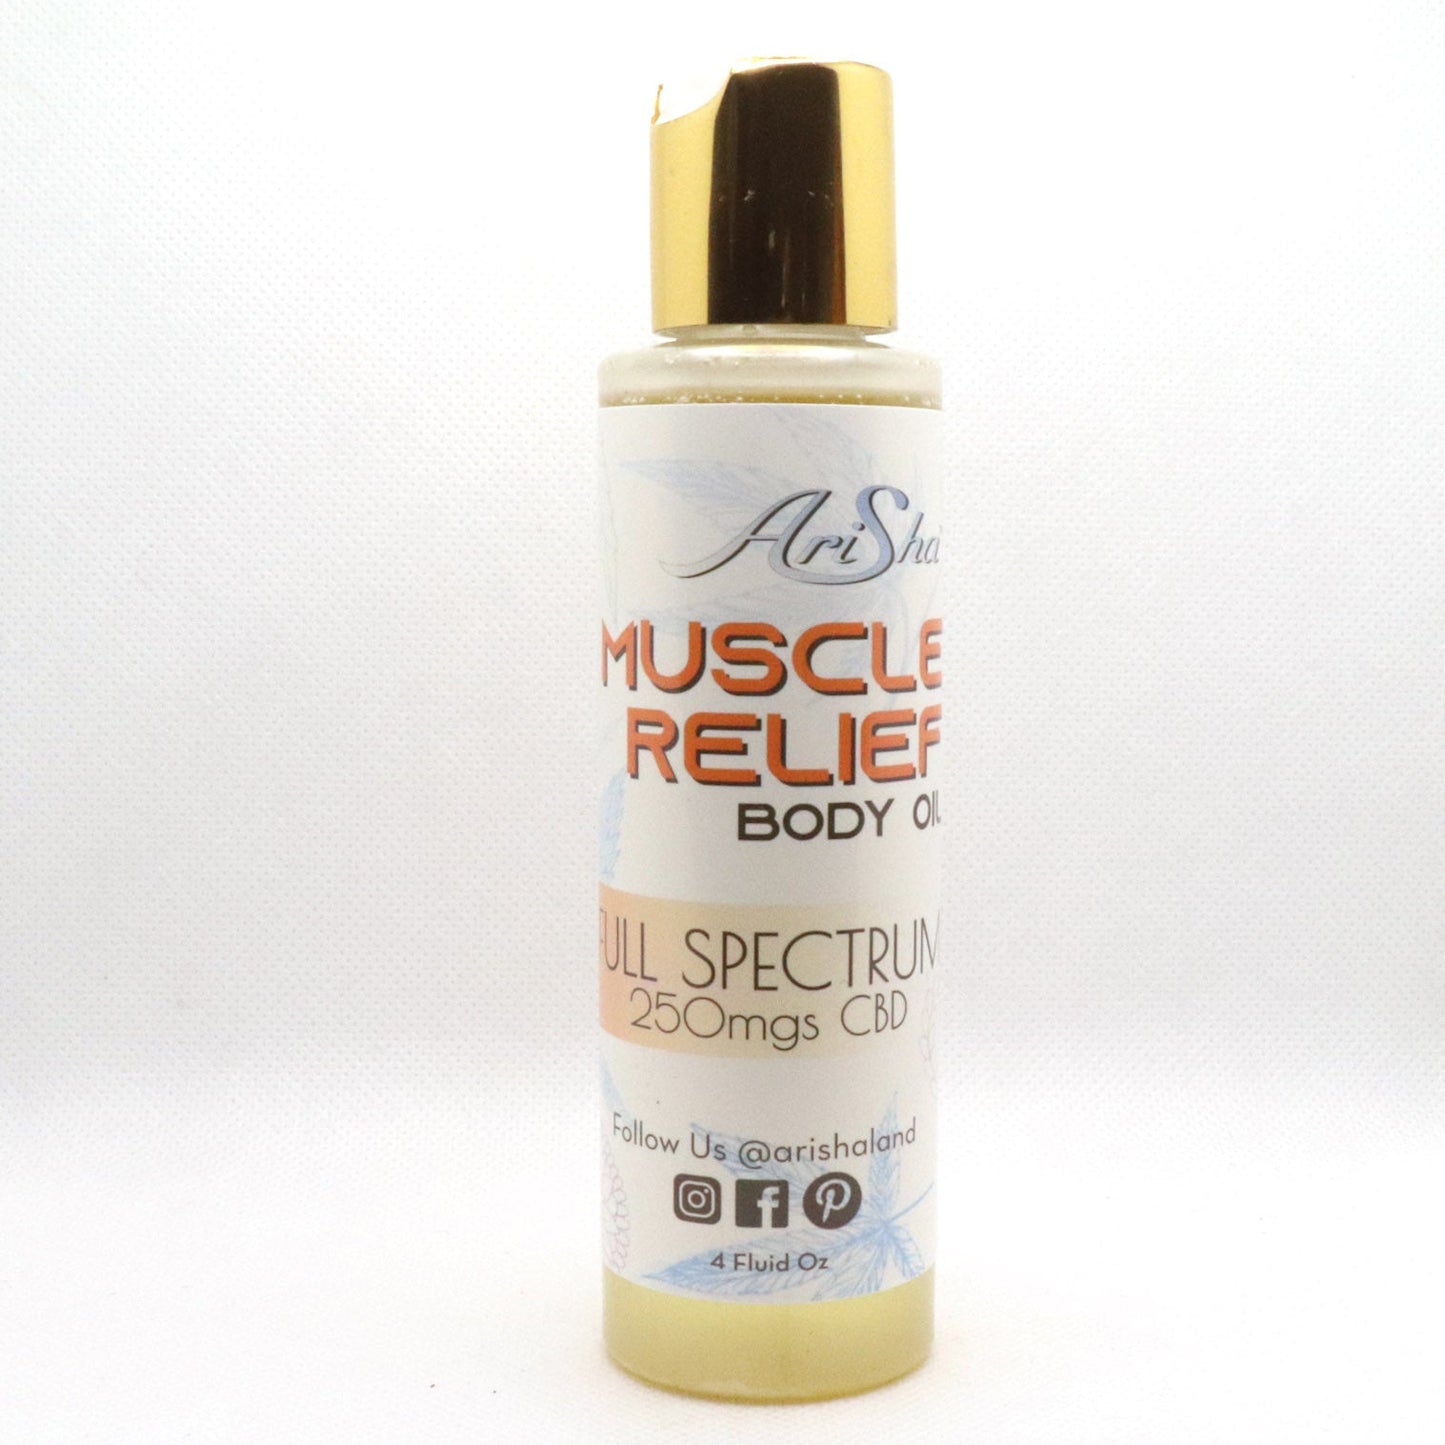 Muscle Relief Body Oil (120 ml, 250 mg CBD)